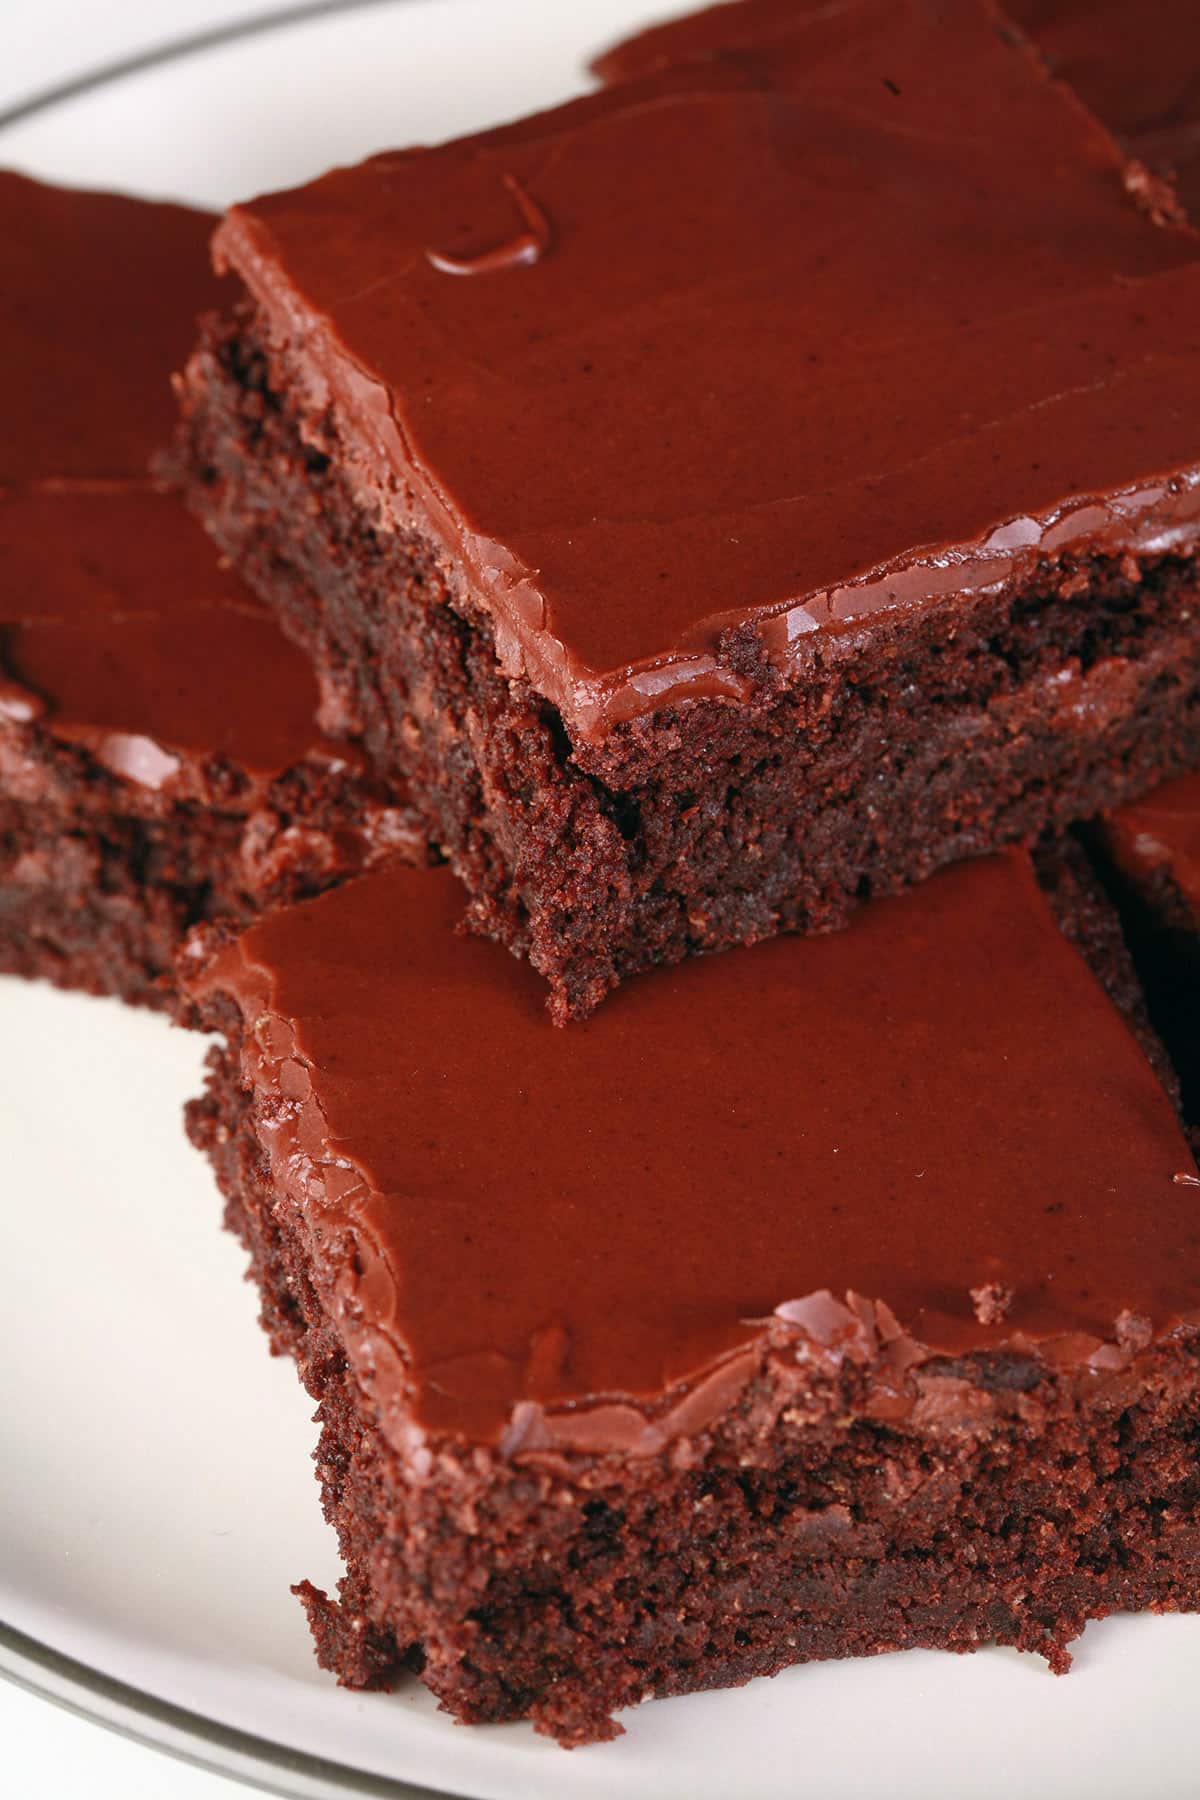 A plate of gluten free brownies with chocolate frosting.